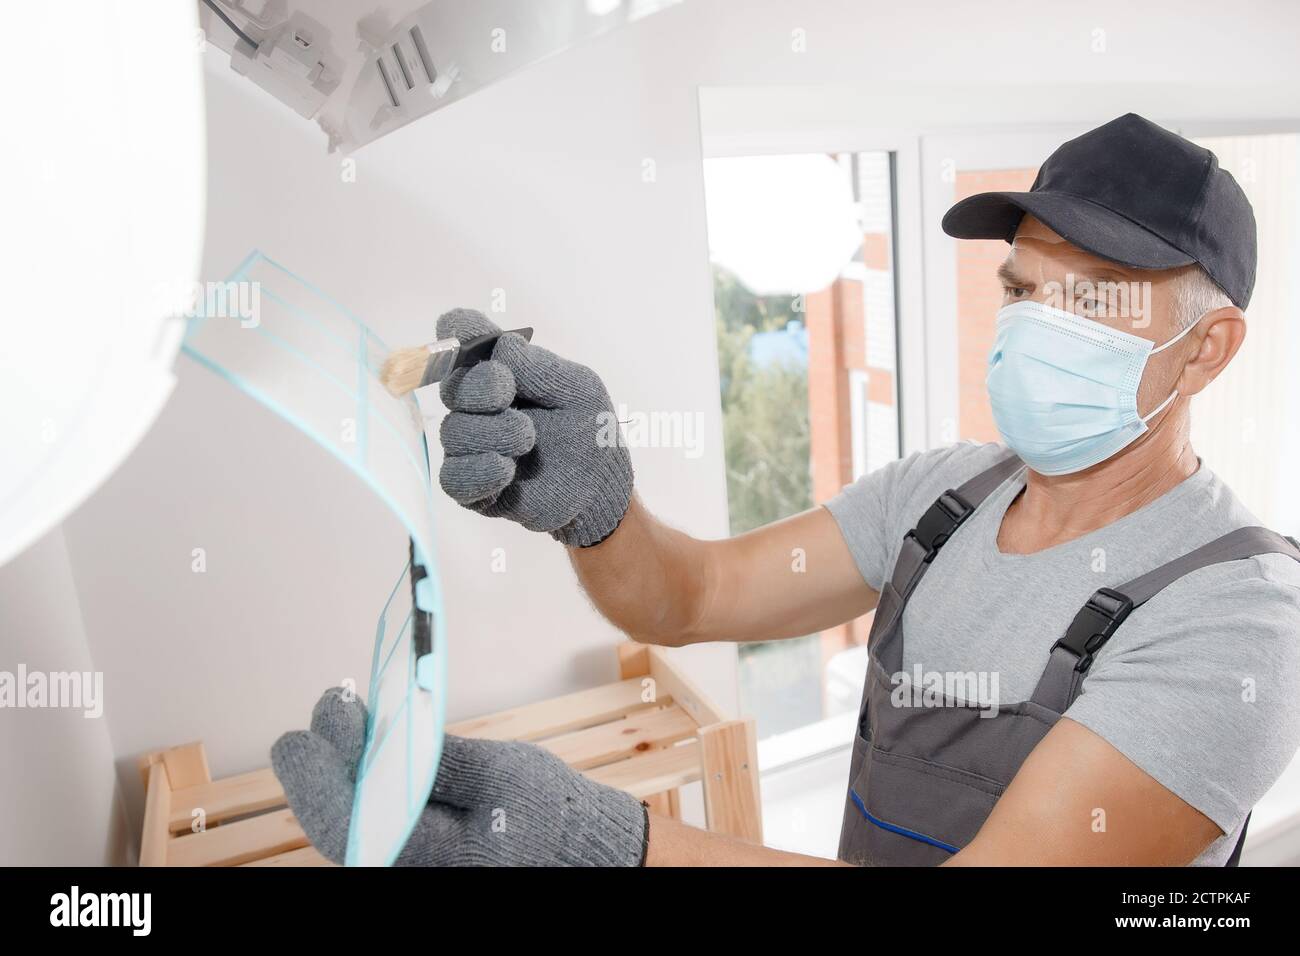 Brush cleaning Air conditioner from dust. Worker in gloves and medical mask checks filter Stock Photo